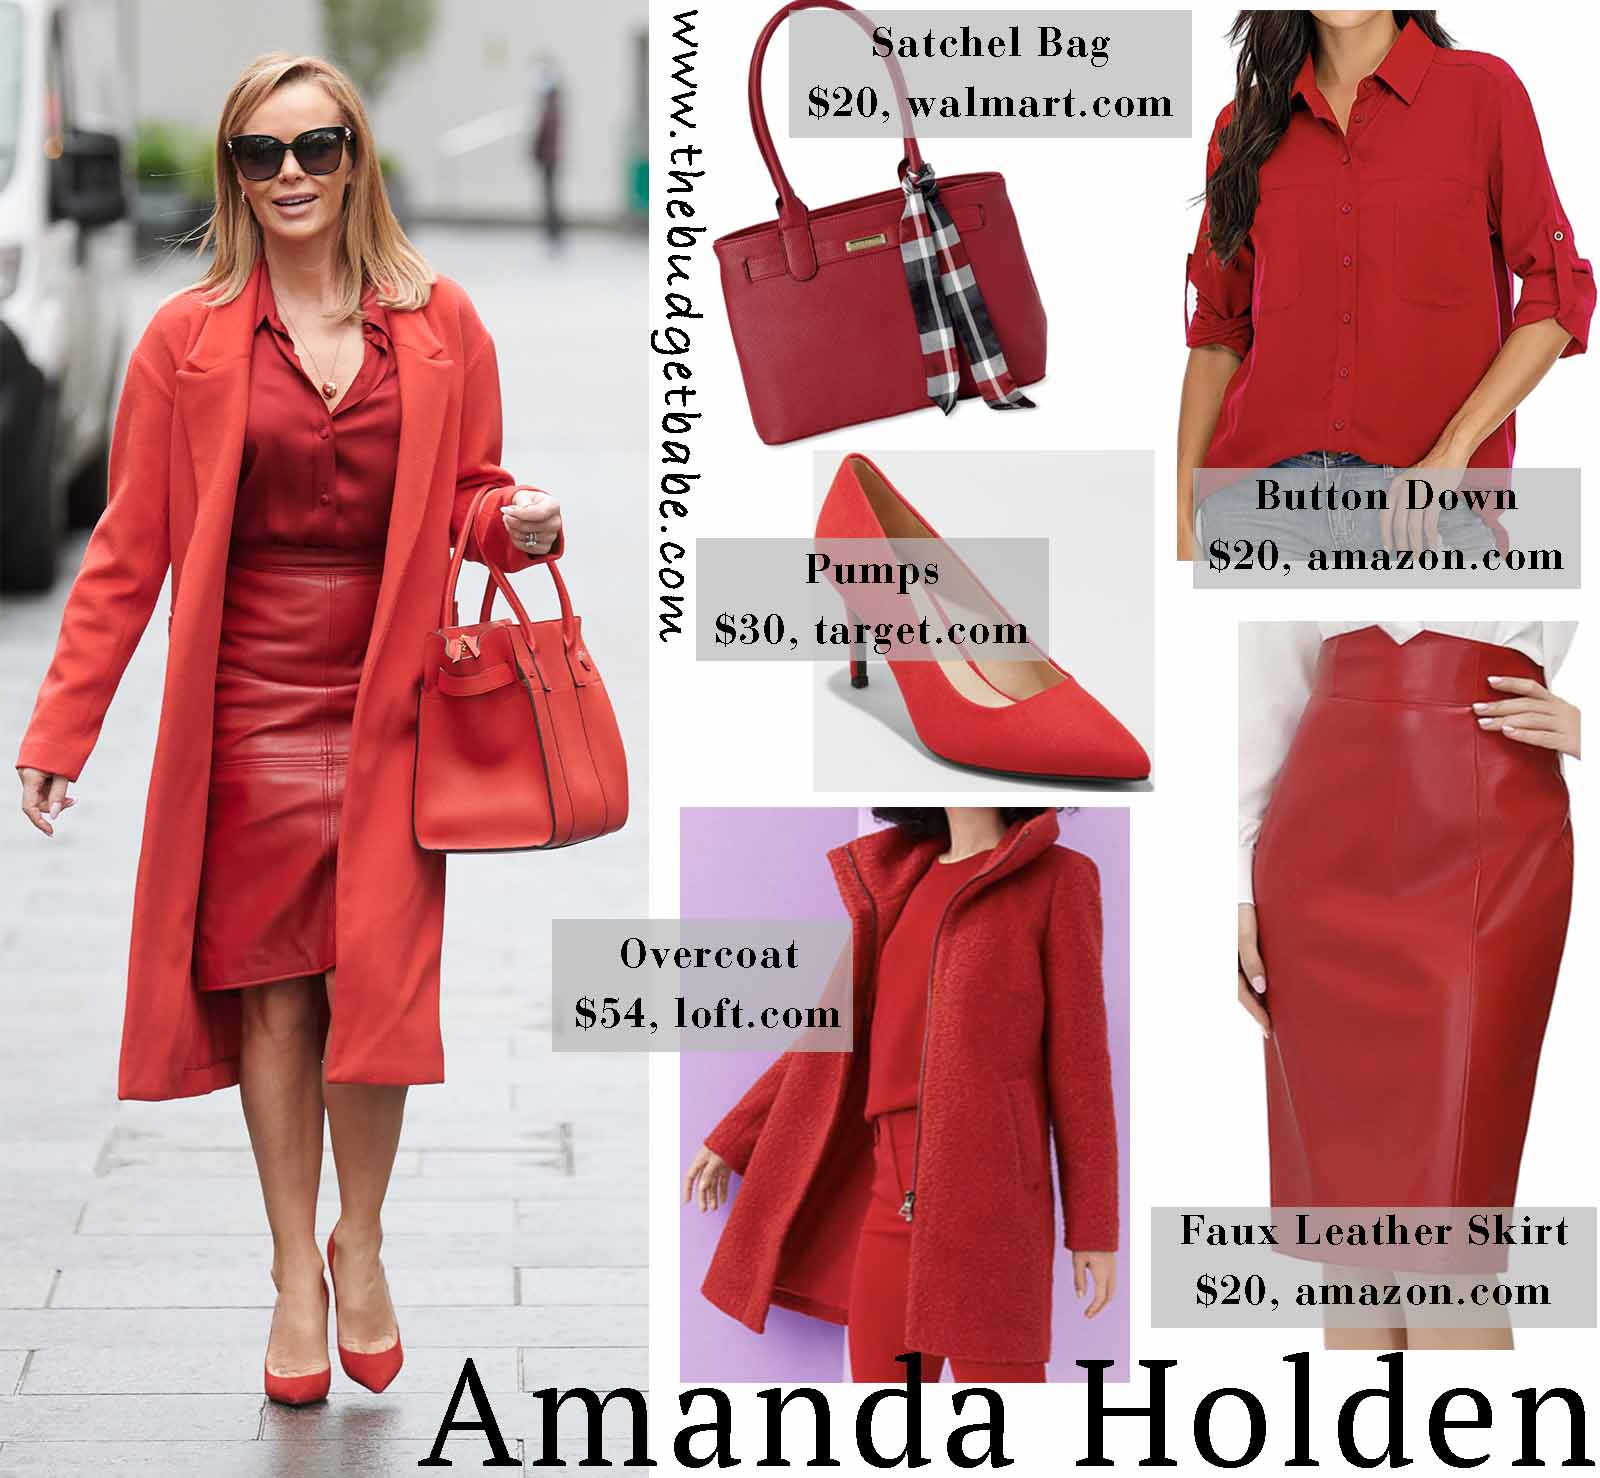 This red look is perfect for the holidays!